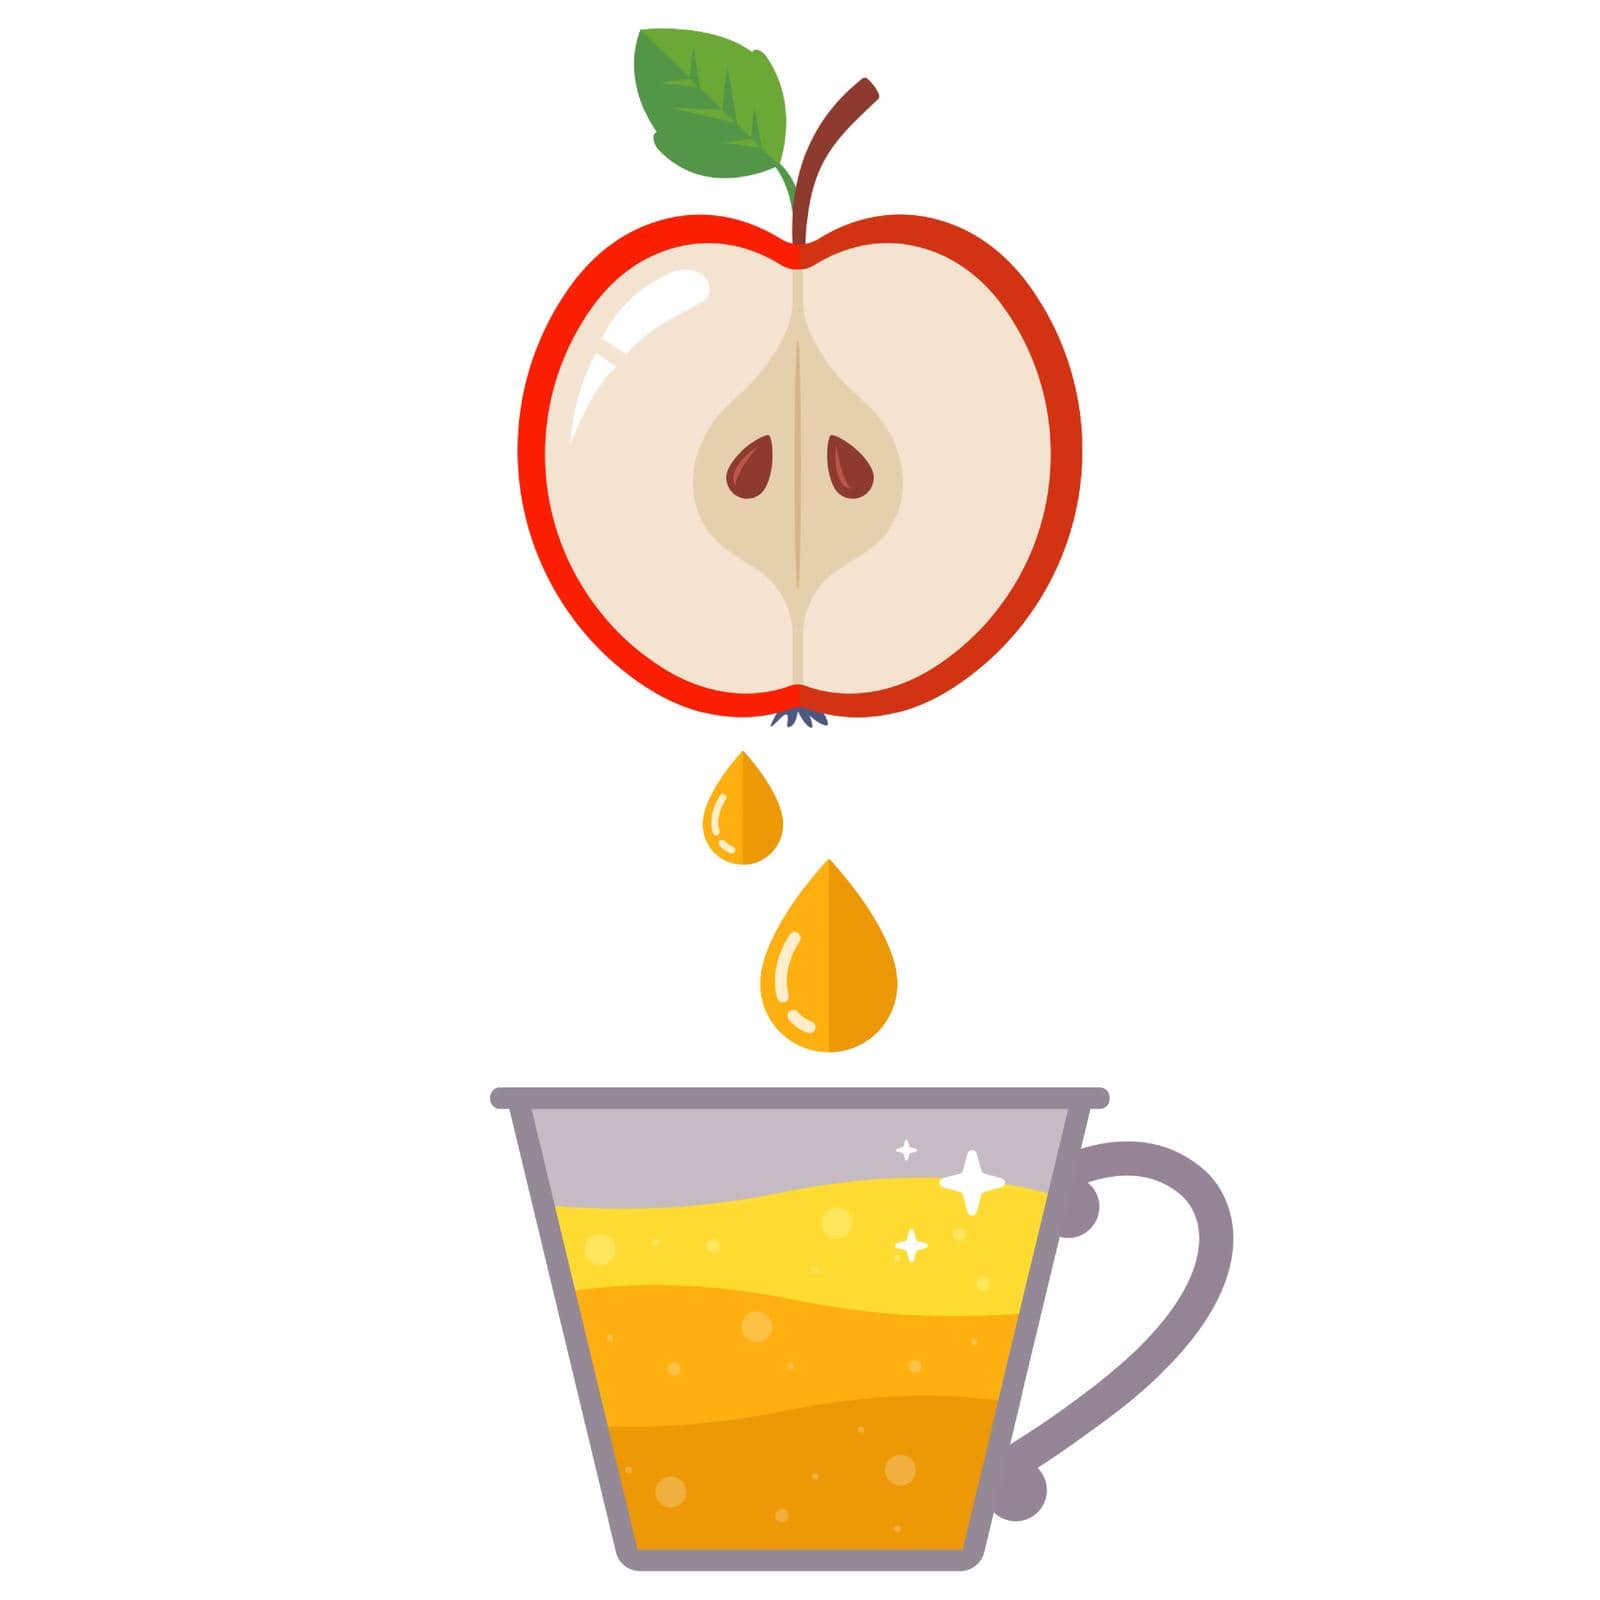 squeeze juice from apples into a glass. fruit juicer. by PlutusART